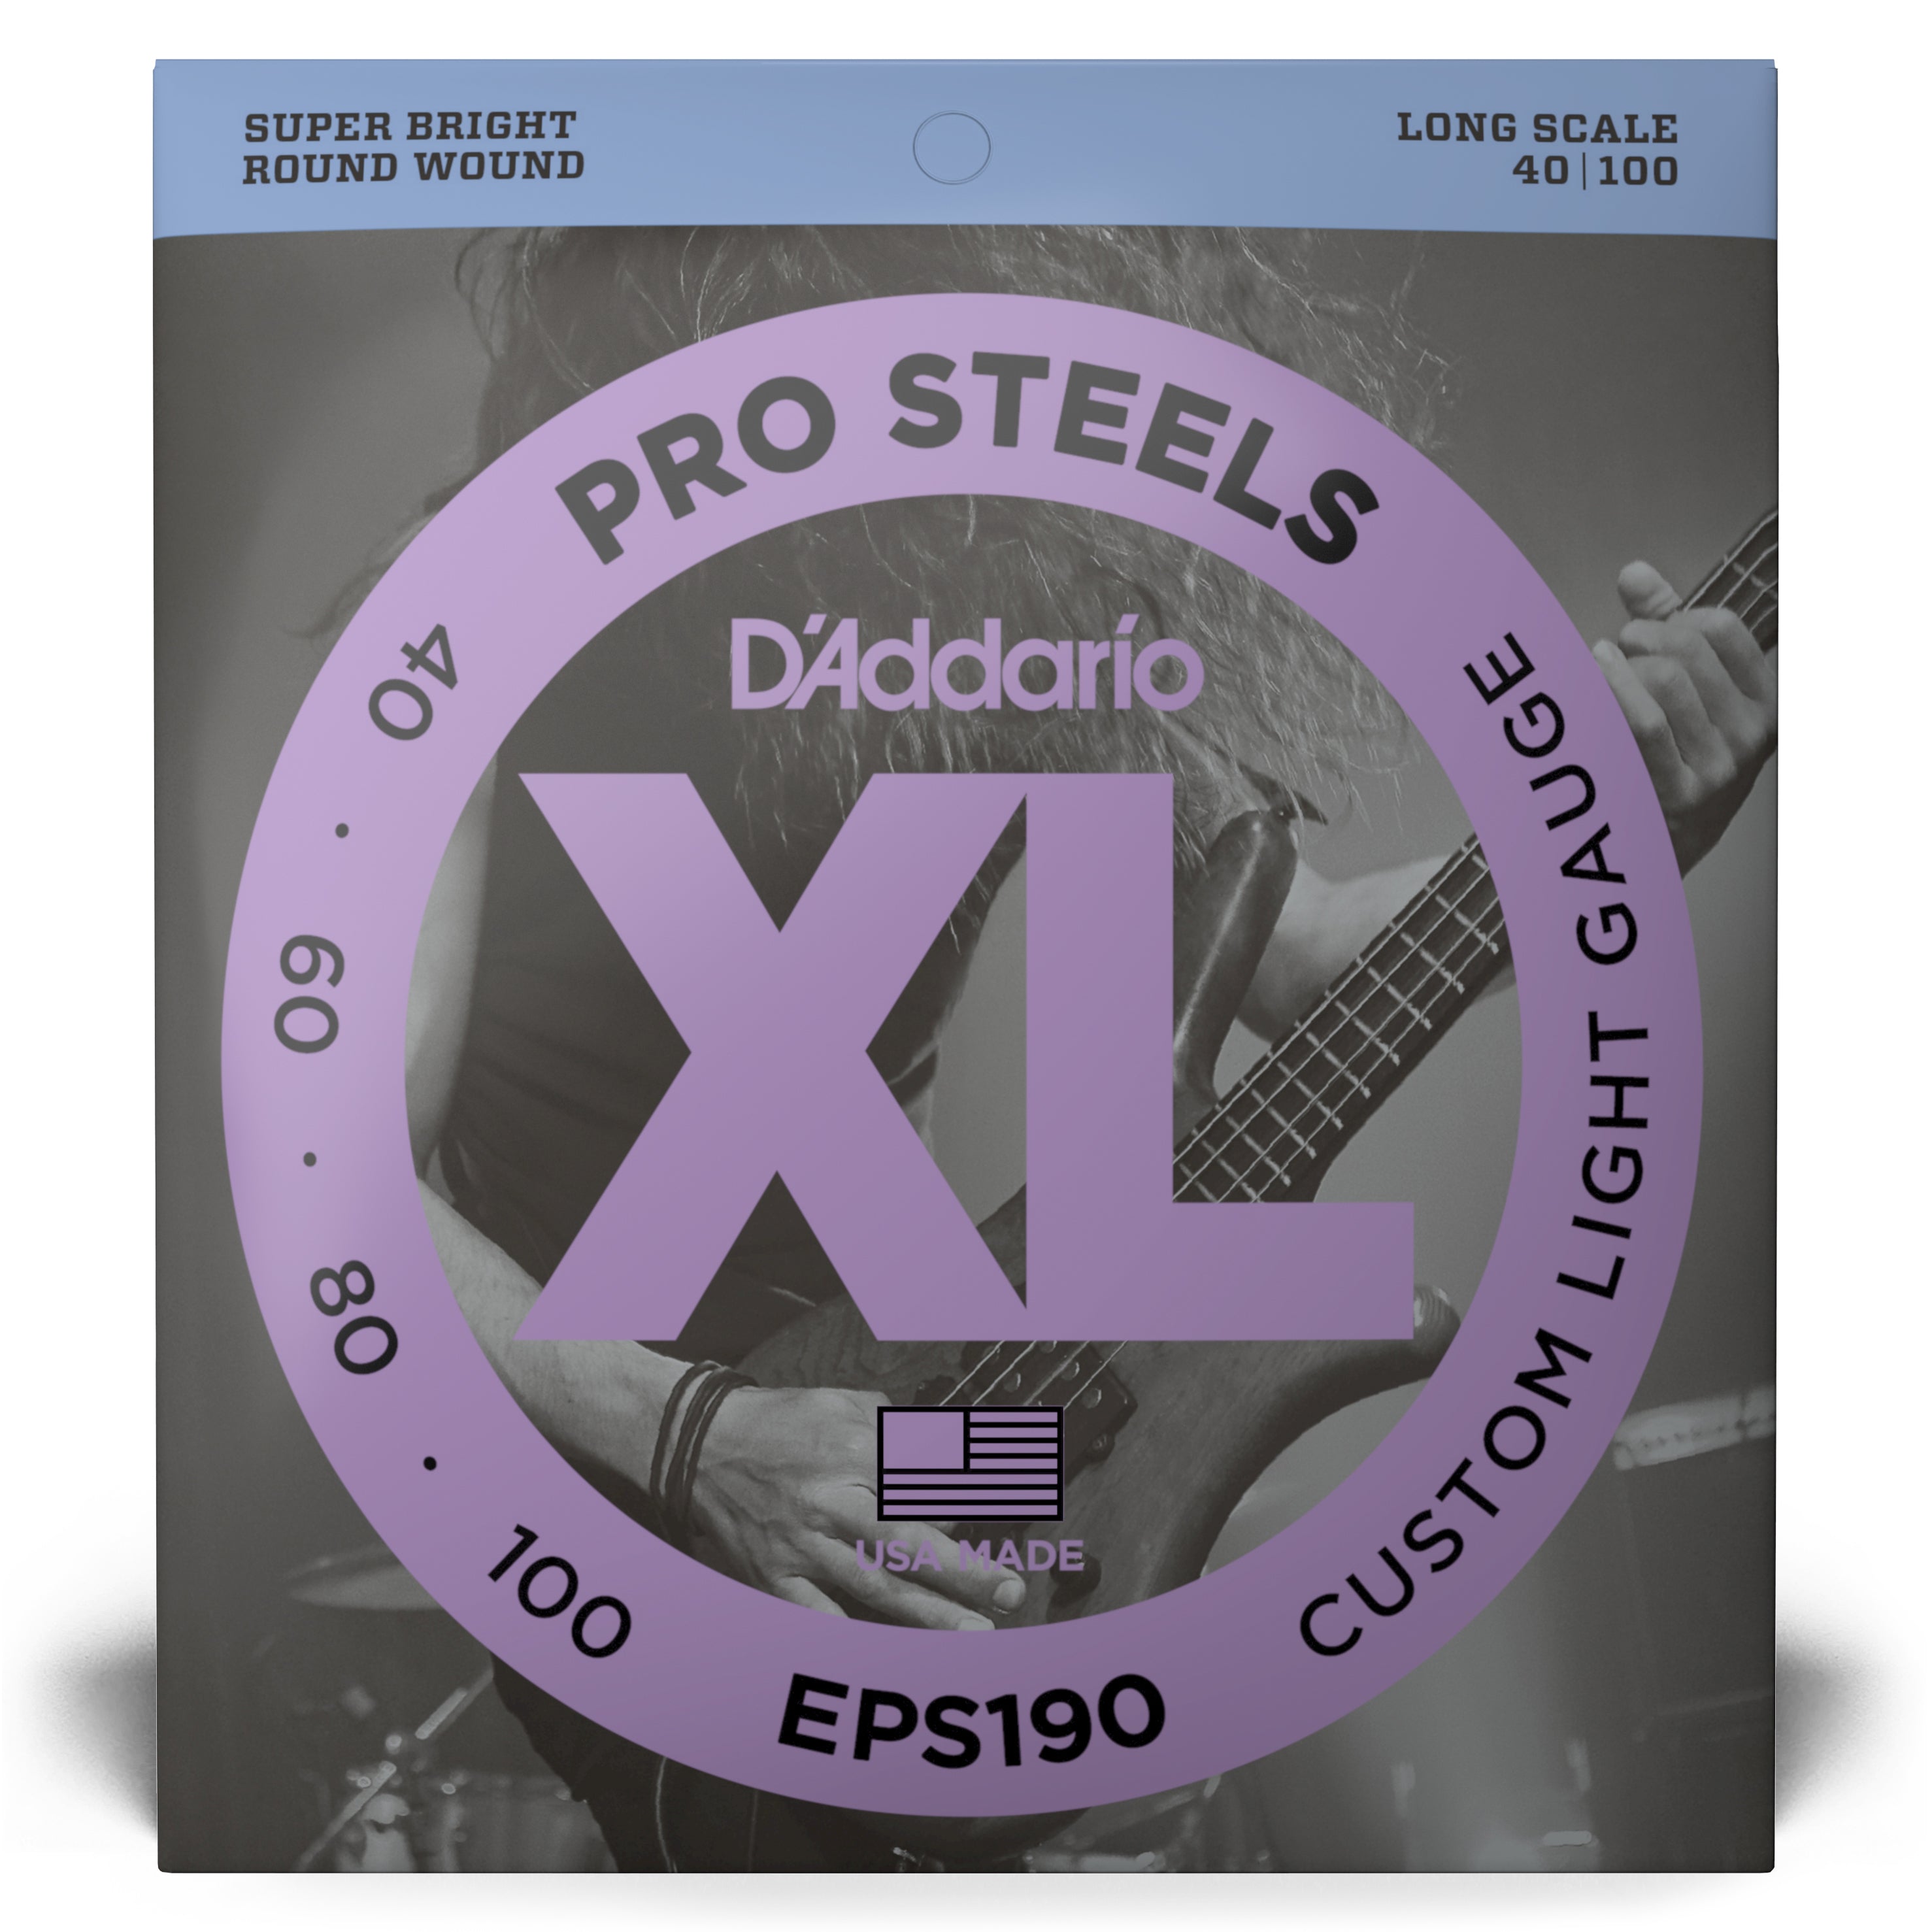 D'Addario Pro Steels 40-100 Stainless Steel Bass Guitar Strings, Long Scale [EPS190]